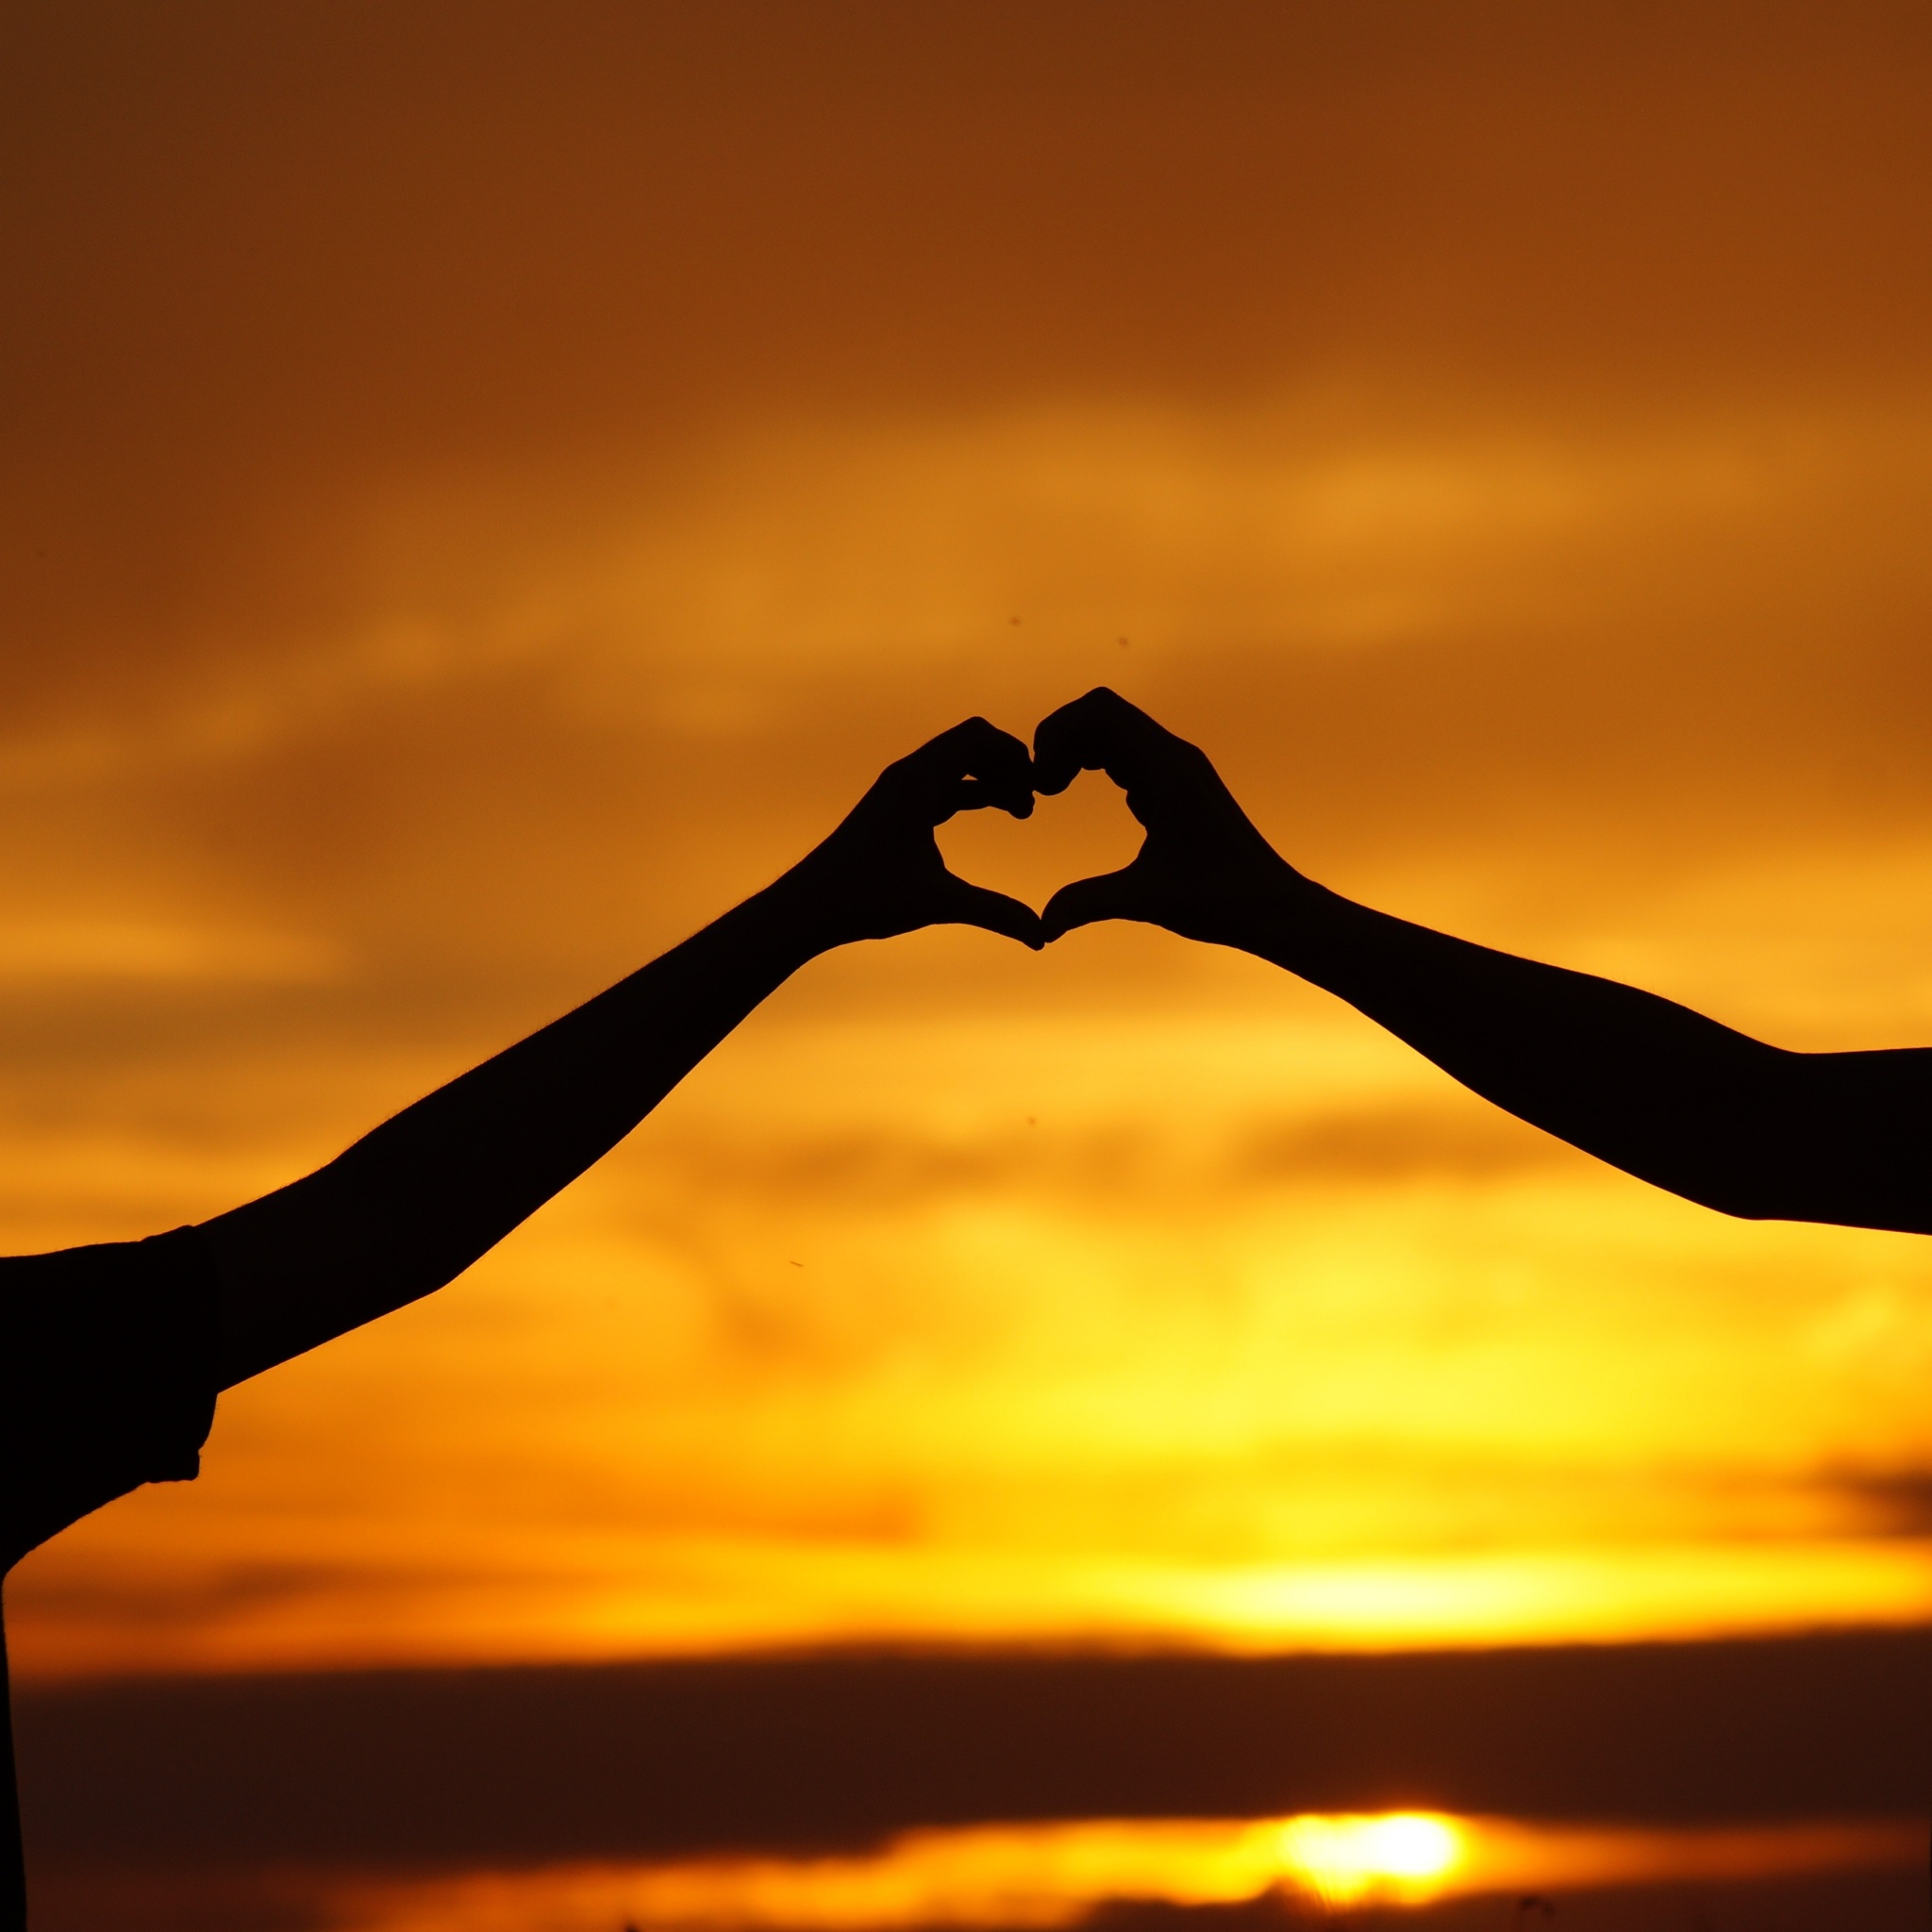 Heart Hands Photos Download The BEST Free Heart Hands Stock Photos  HD  Images